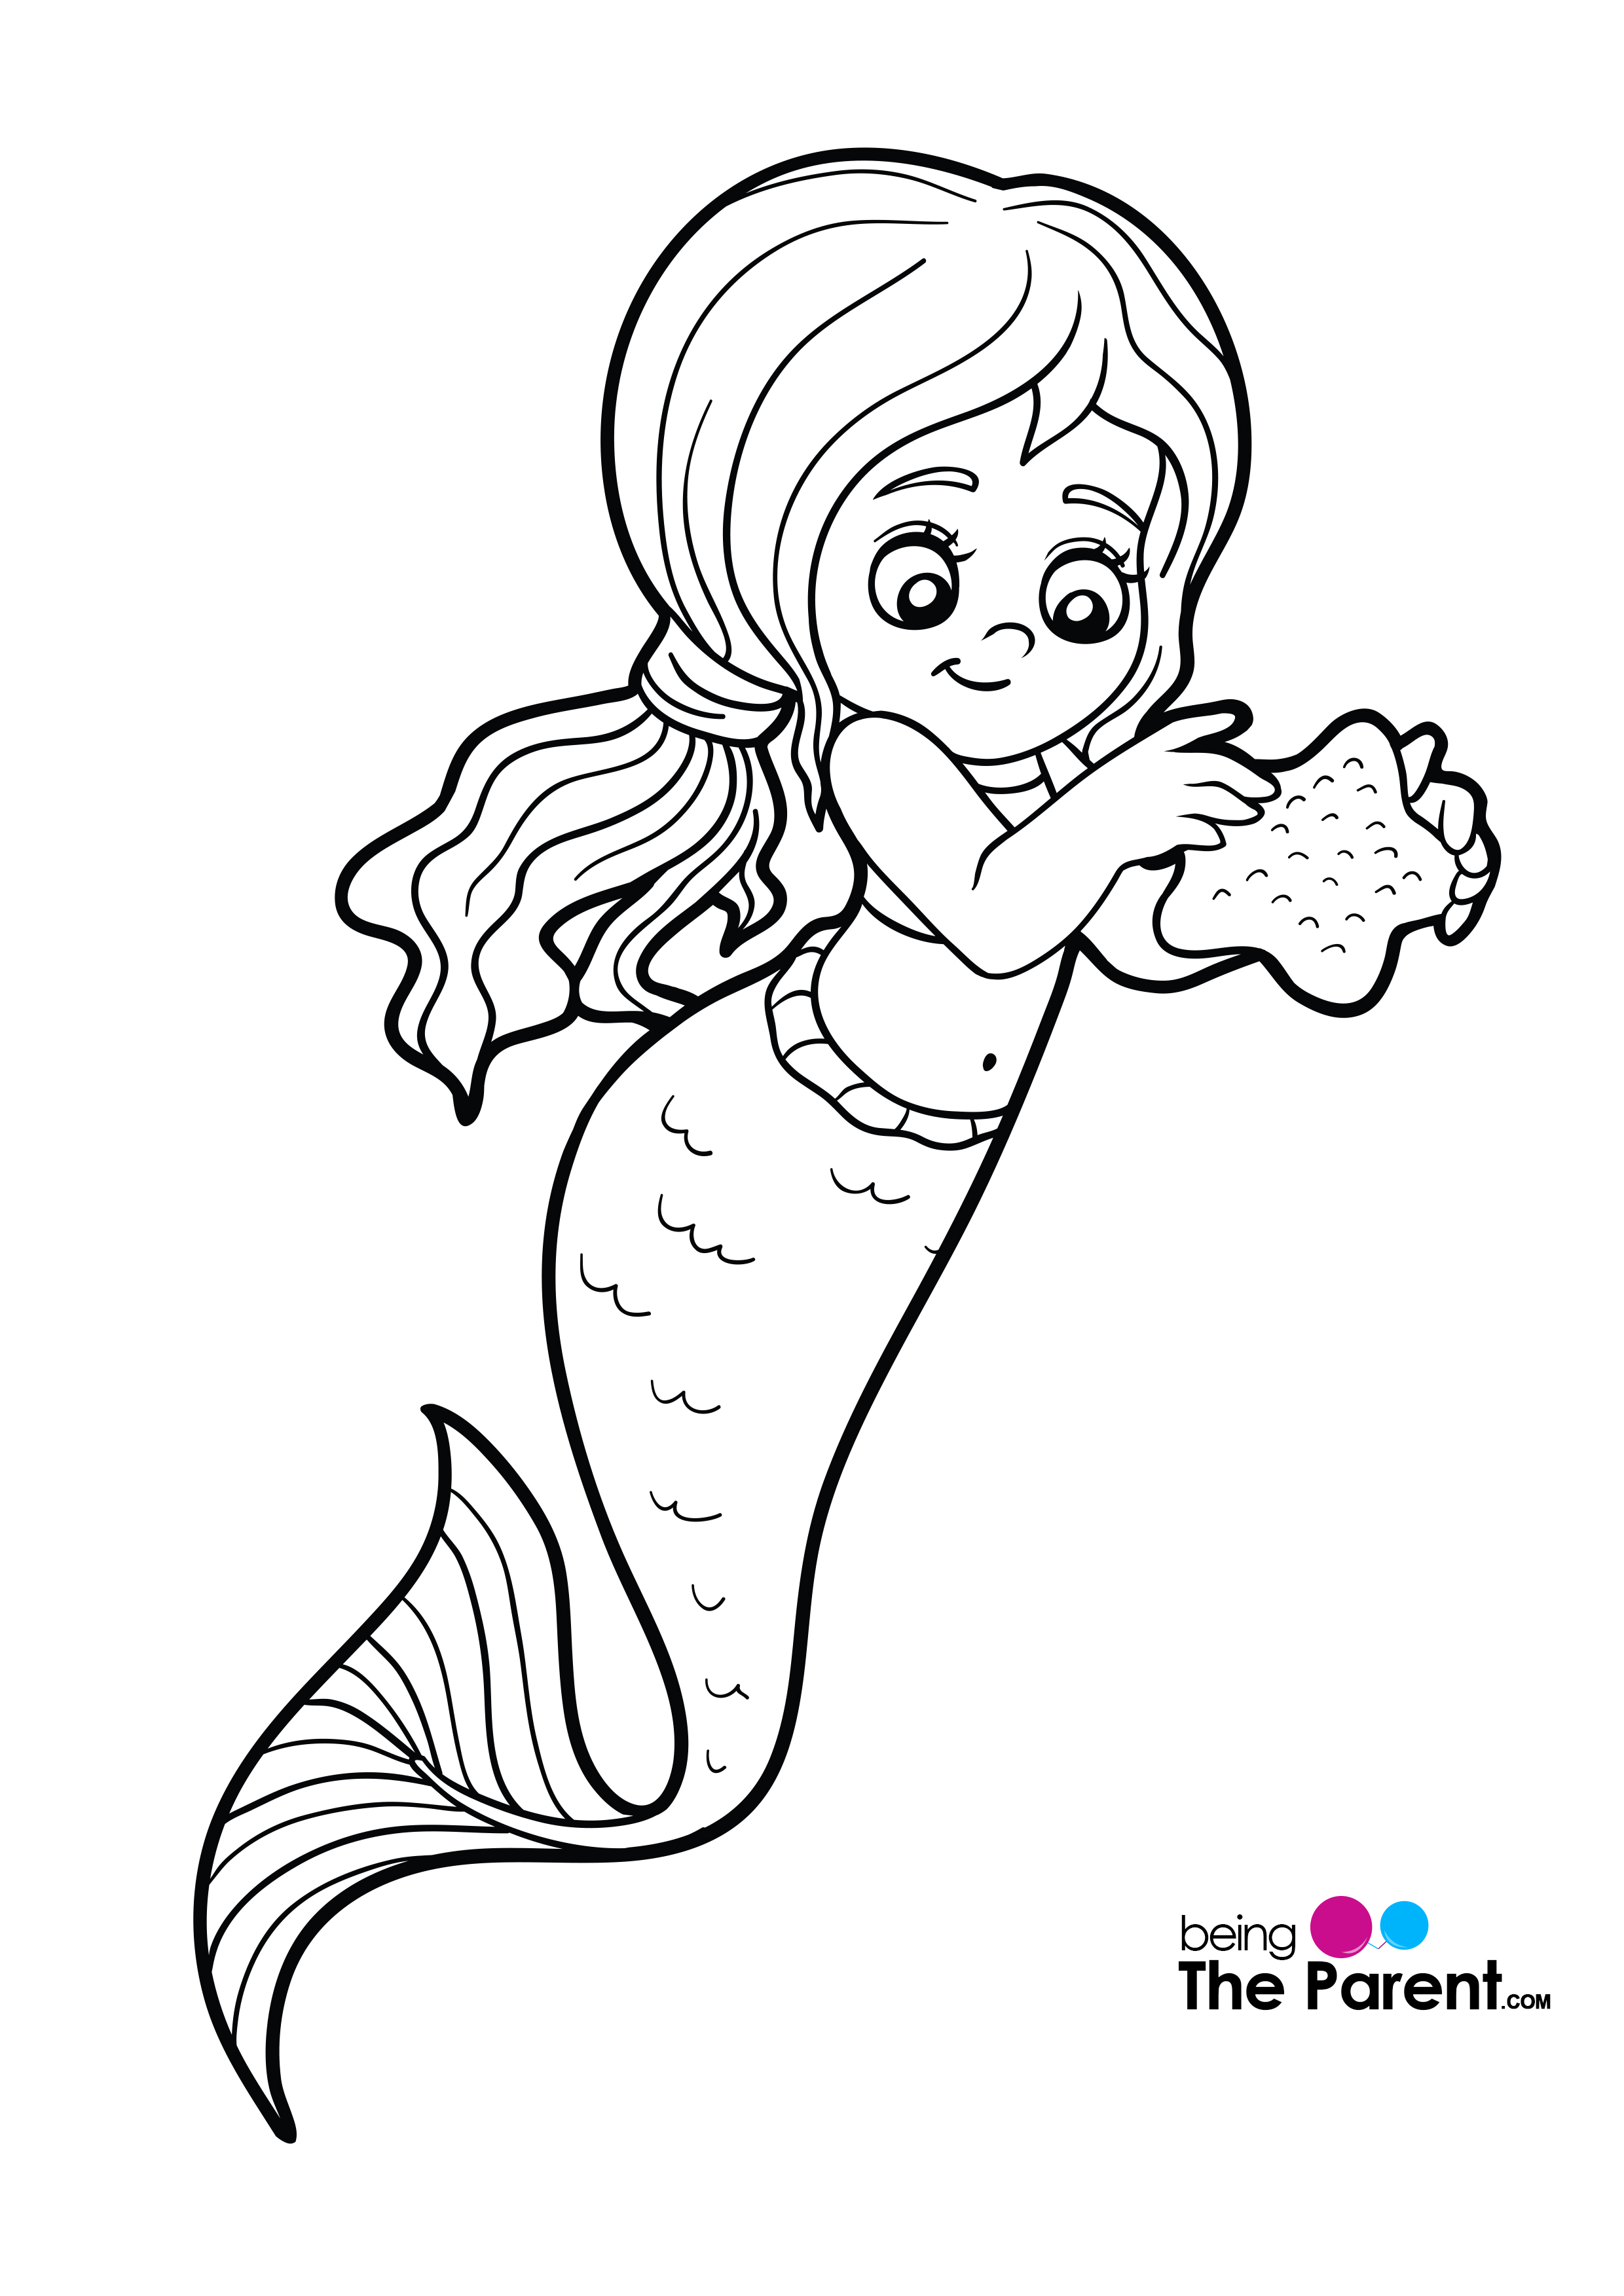 mermaid coloring page 10 easy mermaid coloring pages for your little ones page coloring mermaid 